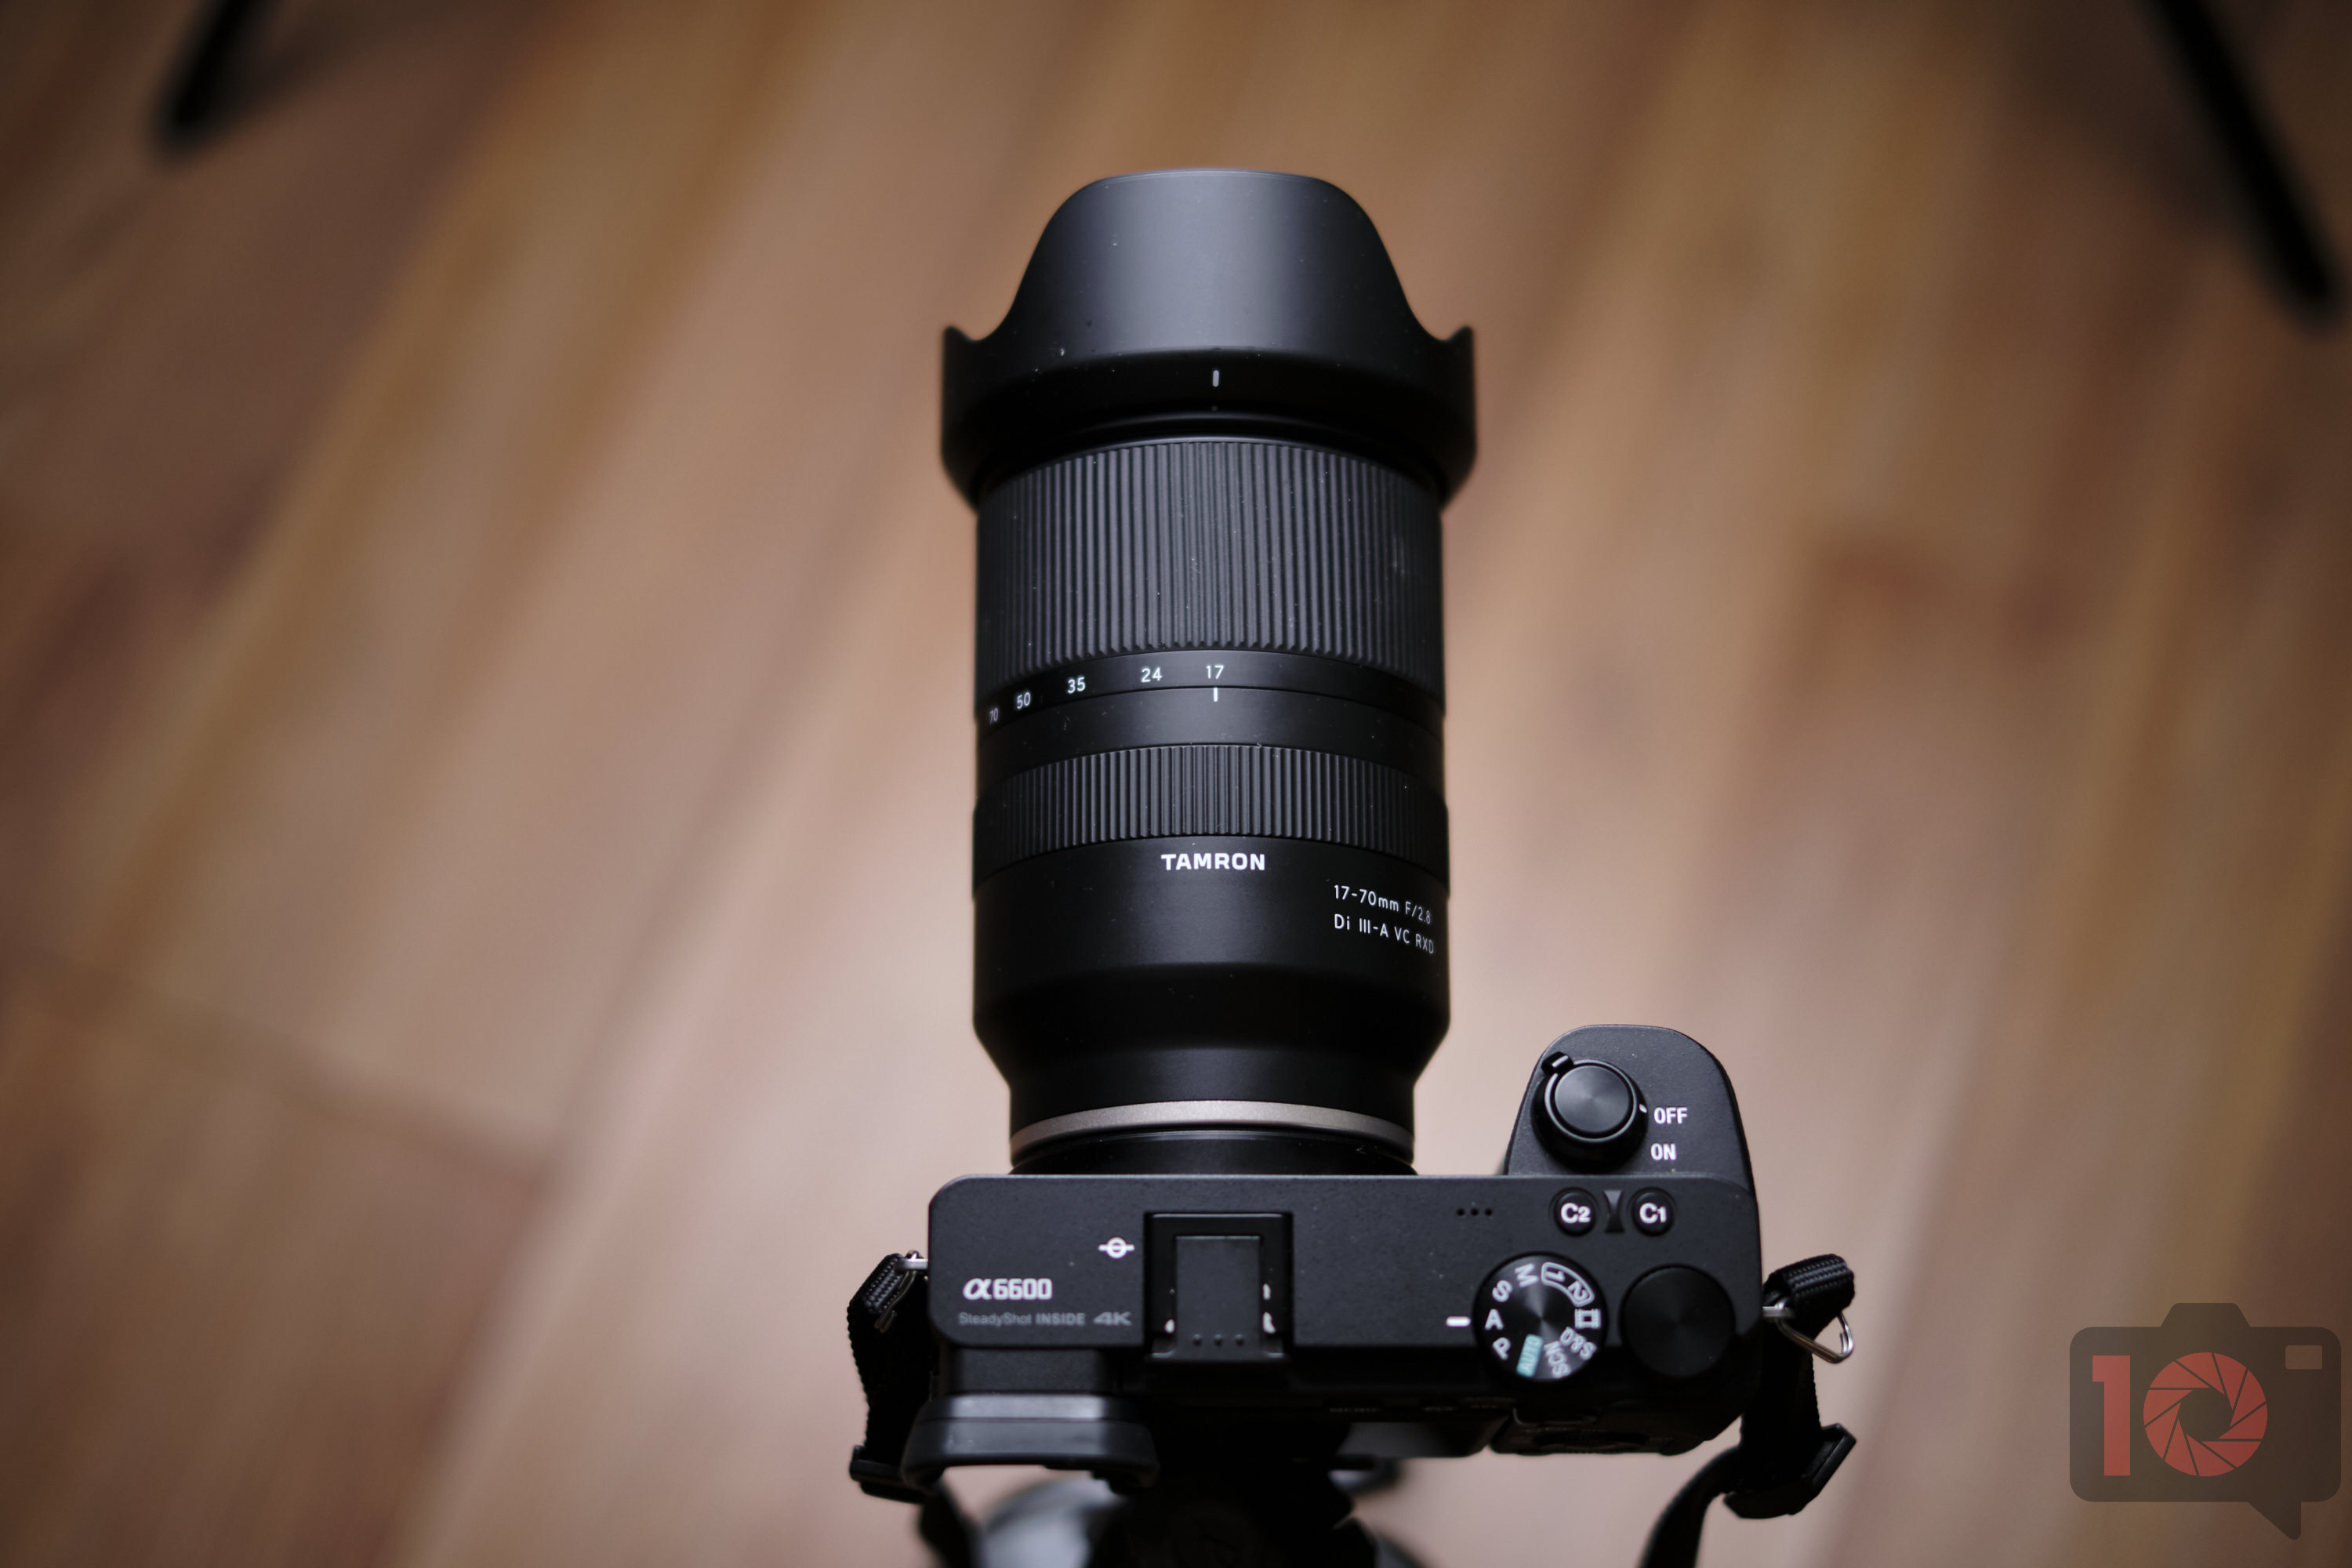 Chris Gampat The Phoblographer Tamron 17-70mm f2.8 Di III-A VC RXD Review product images 1.41-250s400